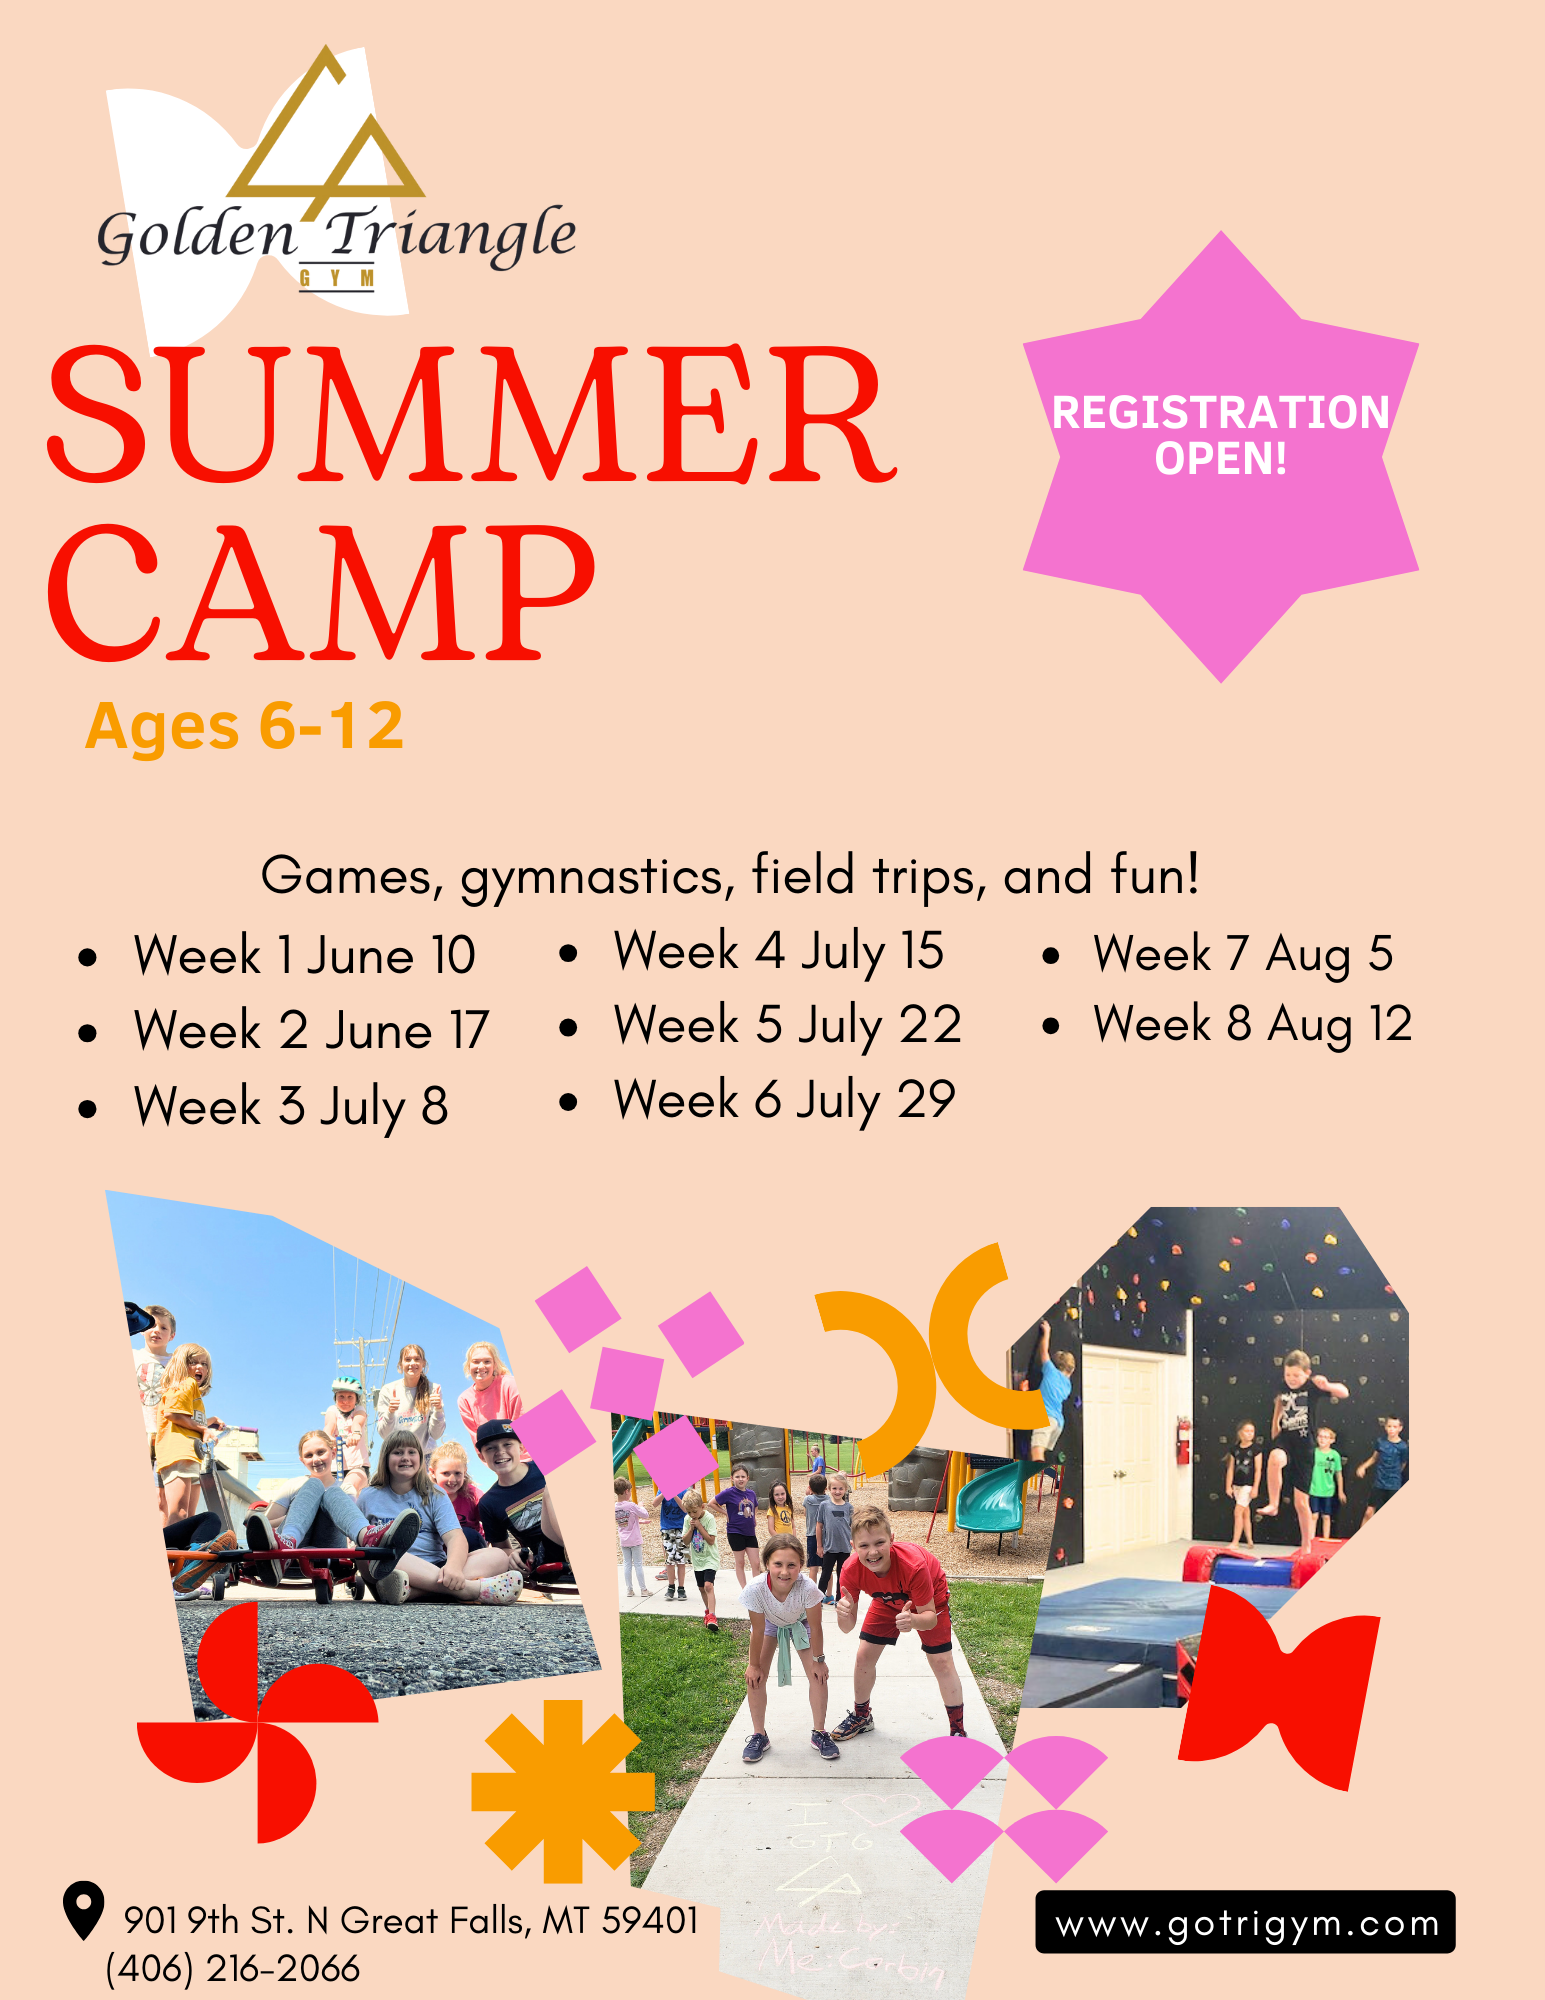 an advertisement for a summer camp at the golden triangle gym